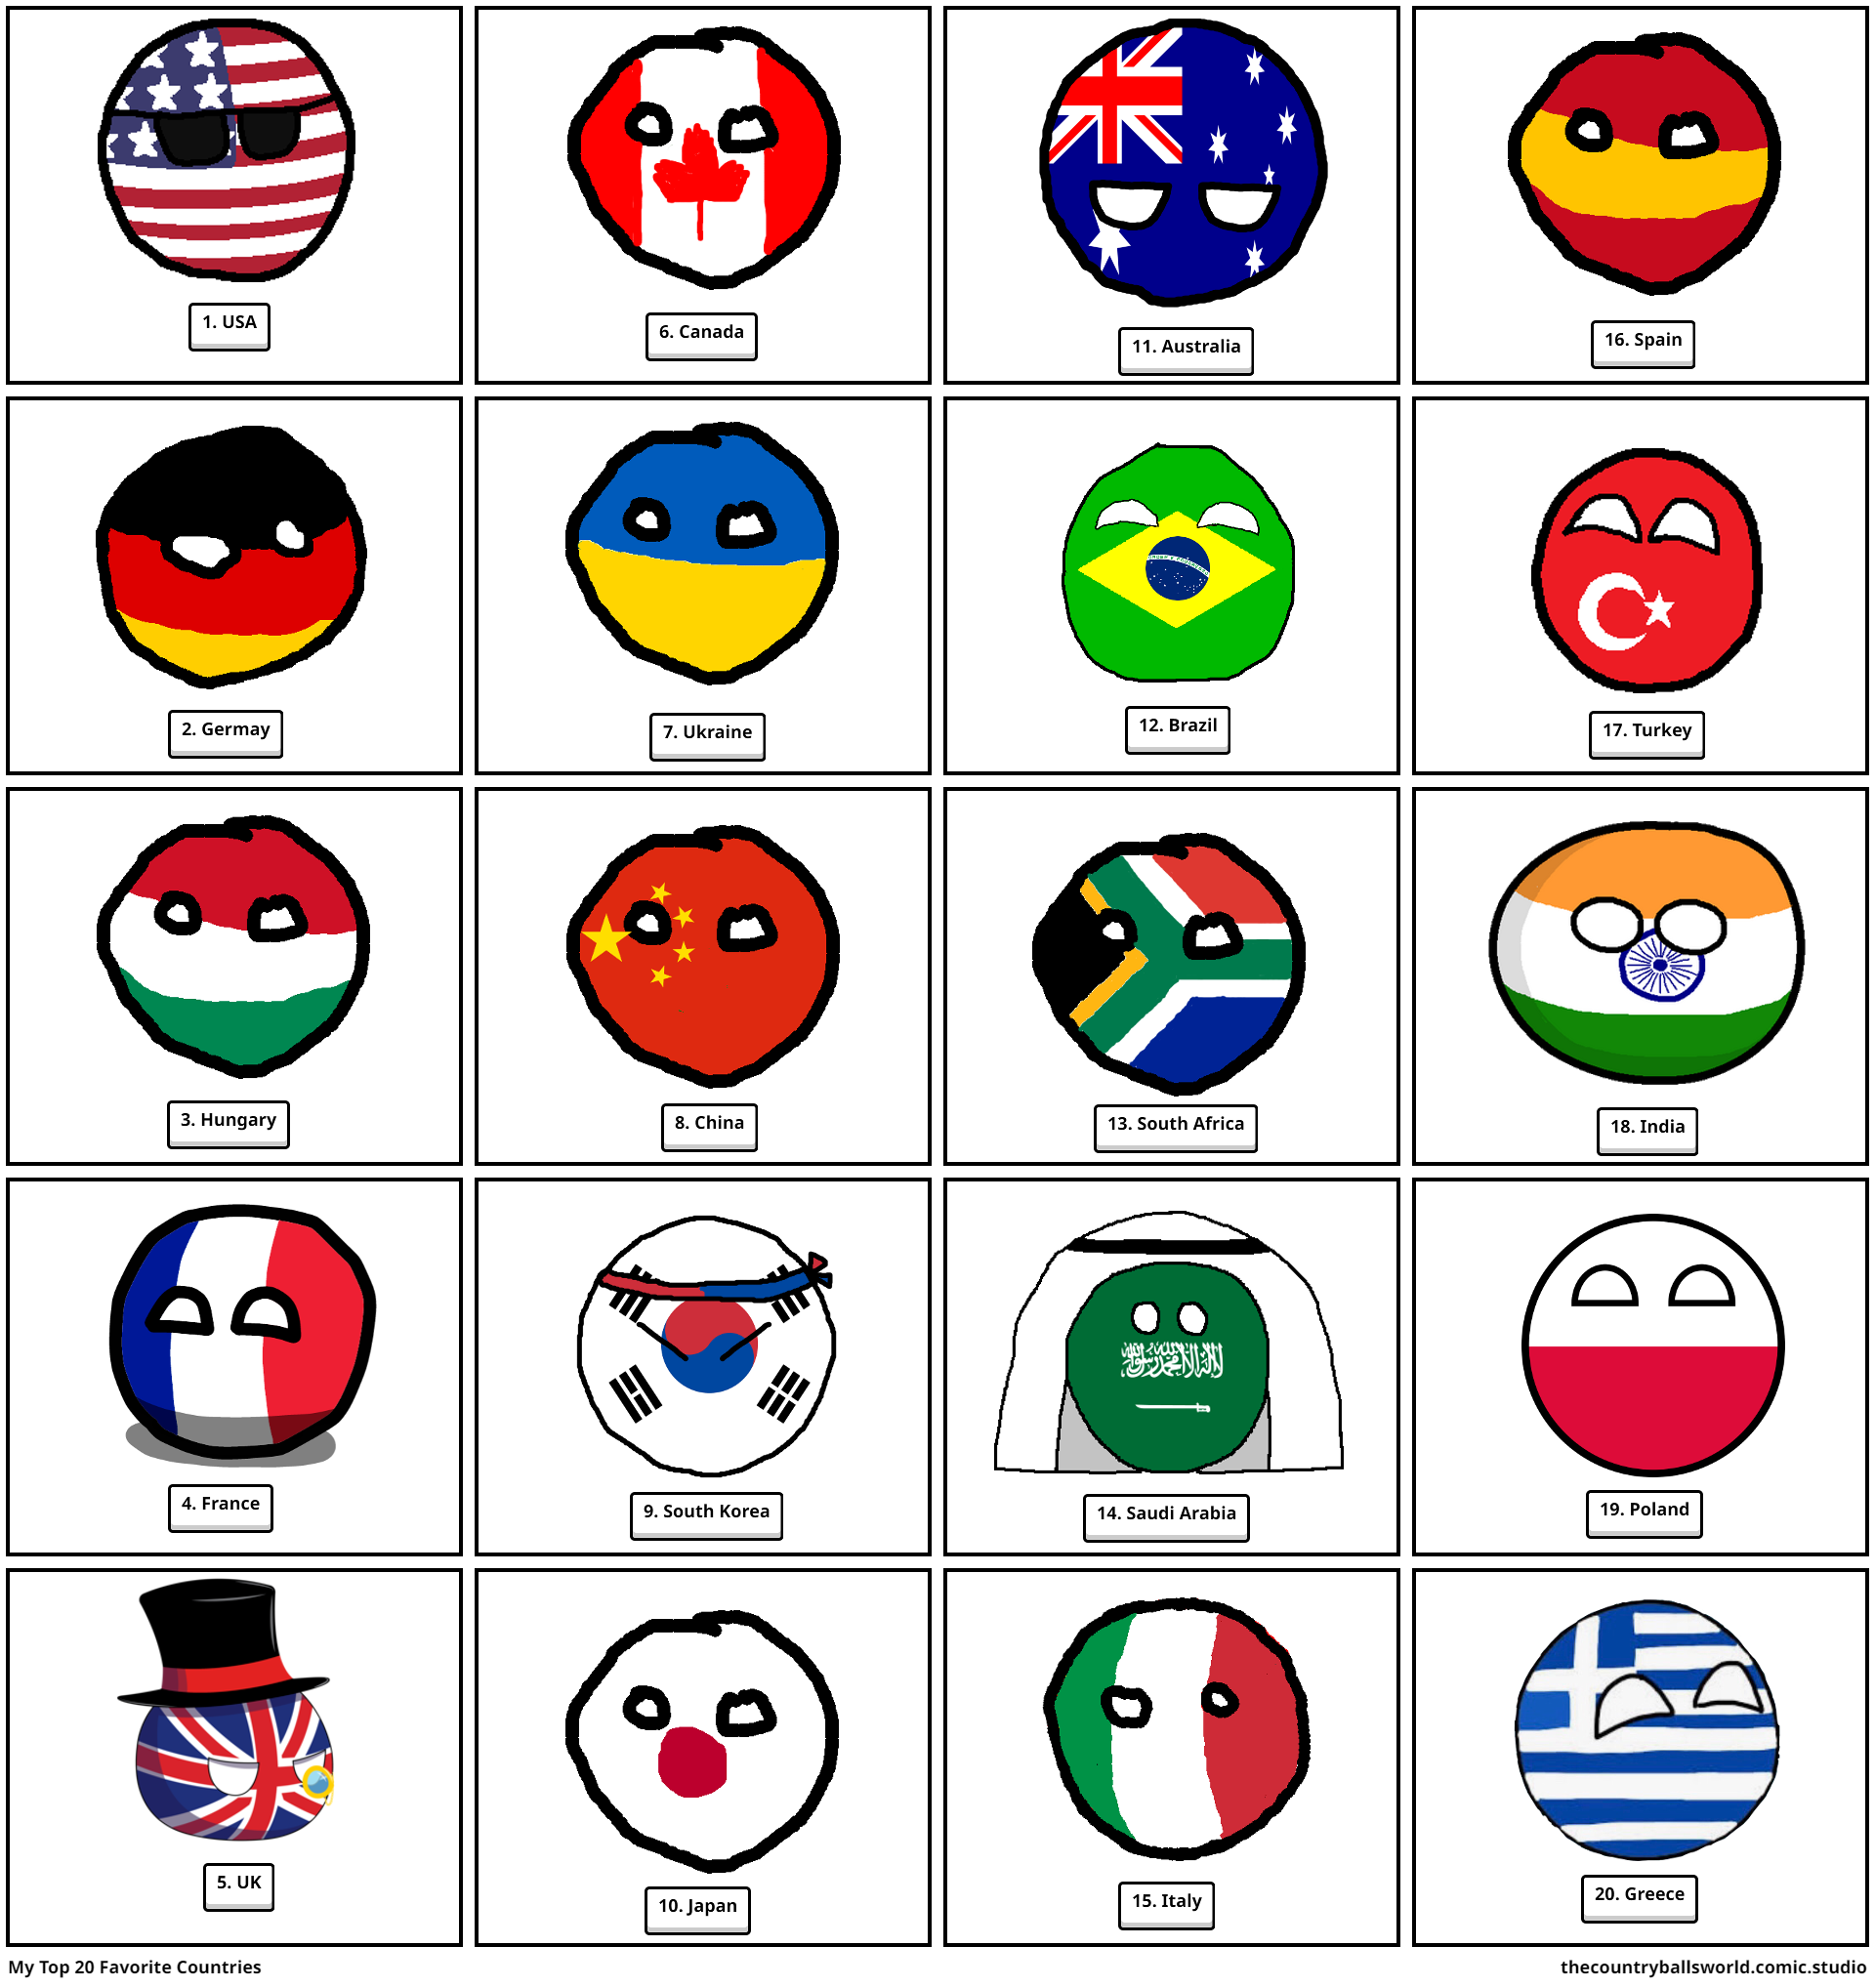 My Top 20 Favorite Countries